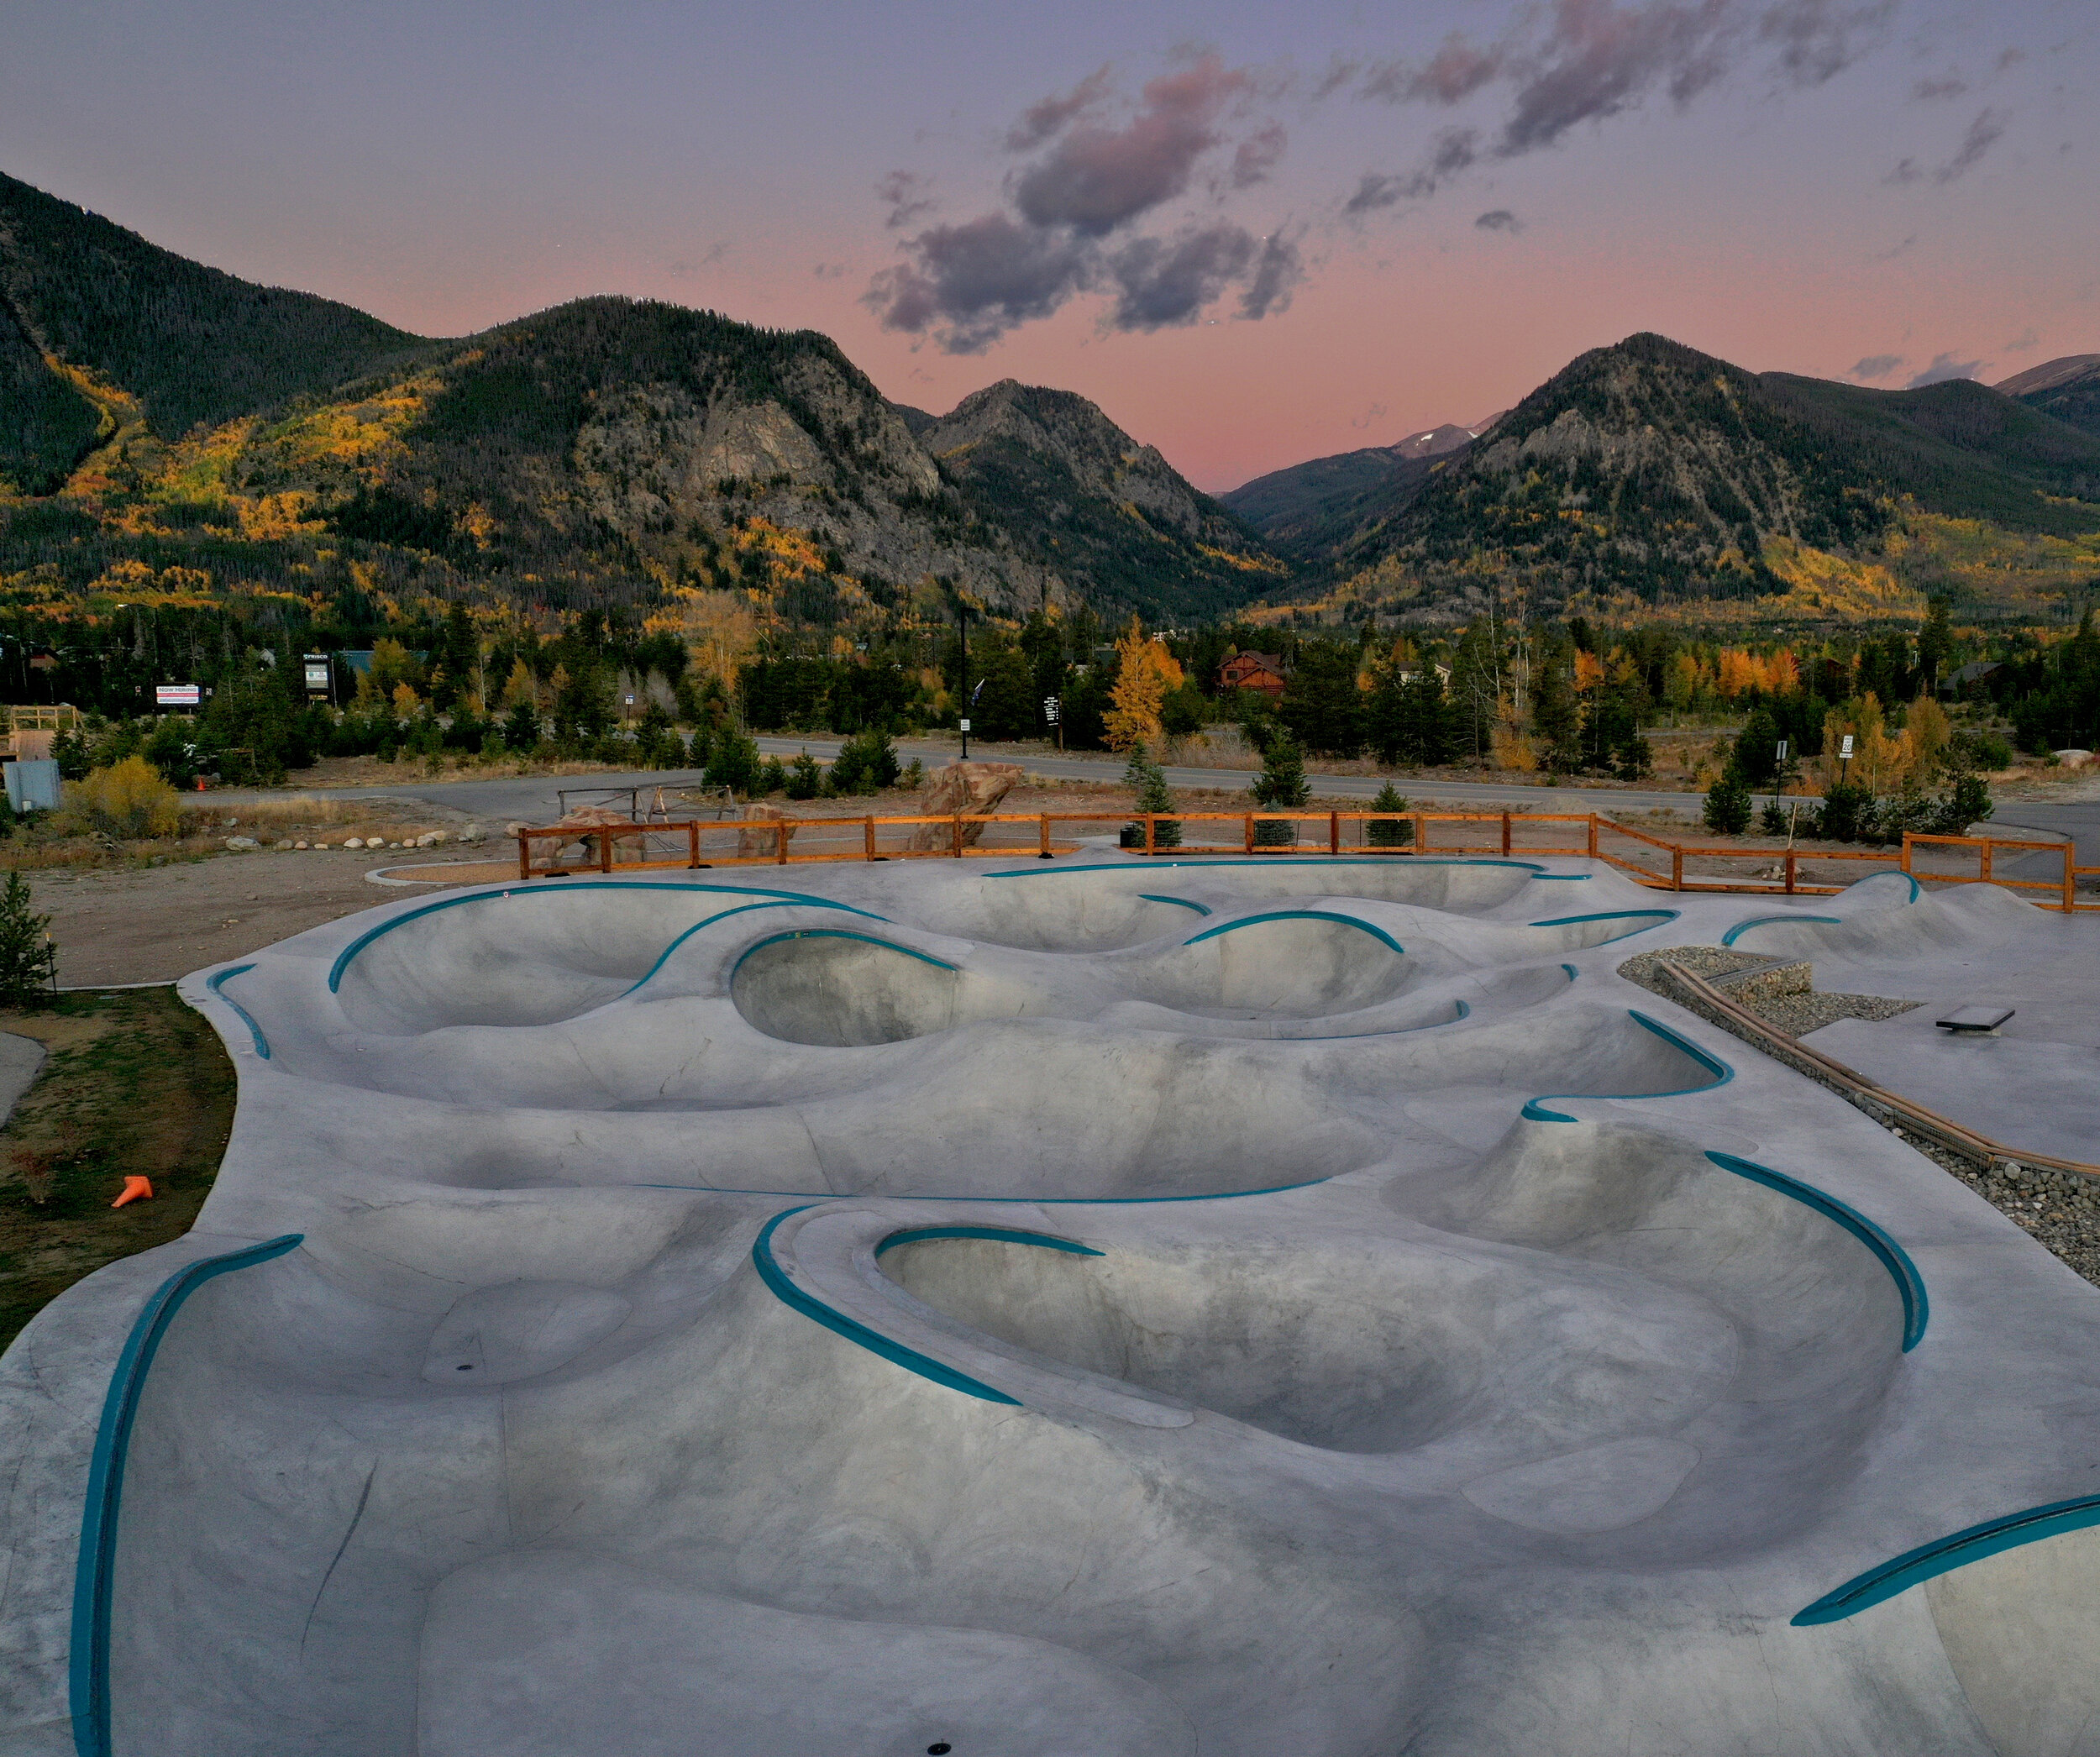 Fall in Frisco 🍁New #evergreenskateparks coming to Colorado in 2020 💥